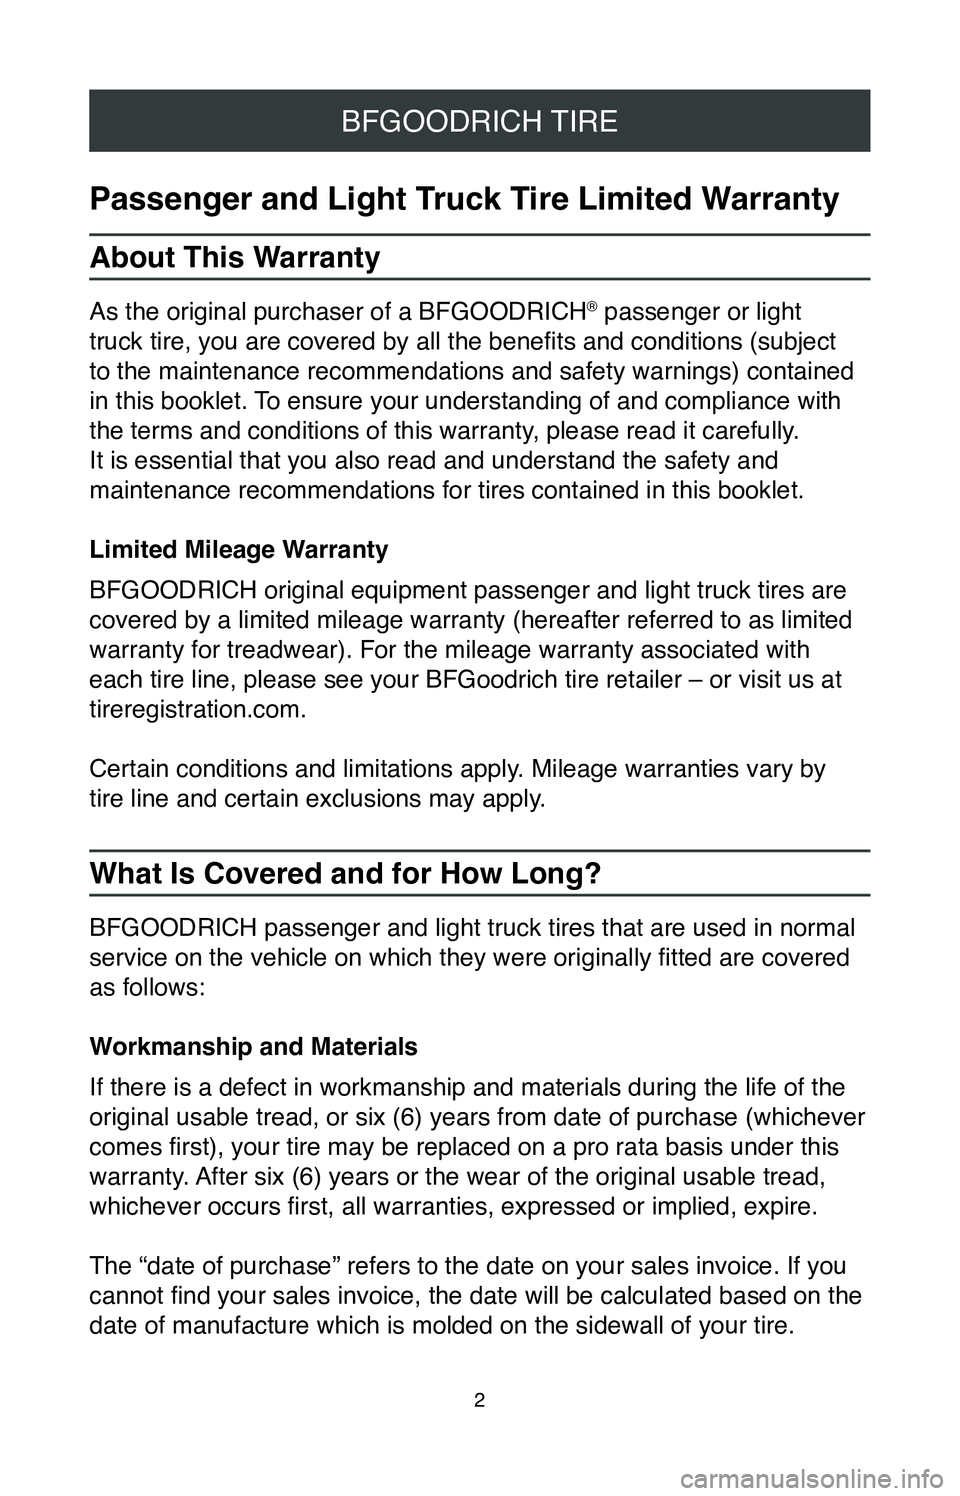 TOYOTA COROLLA 2020  Warranties & Maintenance Guides (in English) 2
BFGOODRICH TIRE
Passenger and Light Truck Tire Limited Warranty
About This Warranty
As the original purchaser of a BFGOODRICH® passenger or light 
truck tire, you are covered by all the benefits an